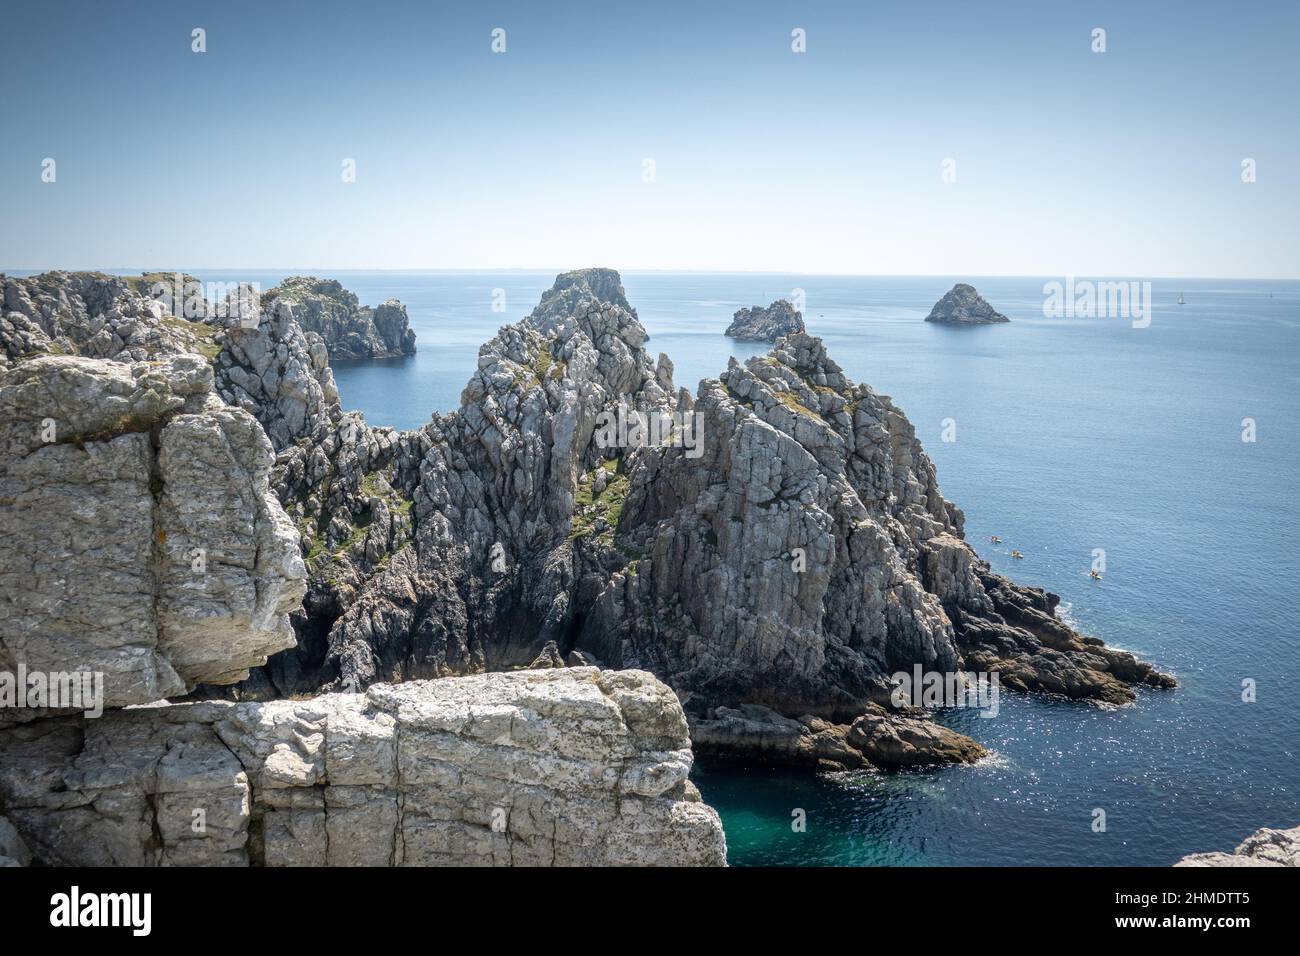 Scenic view of rocky cliff on sea, Brittany, France Stock Photo